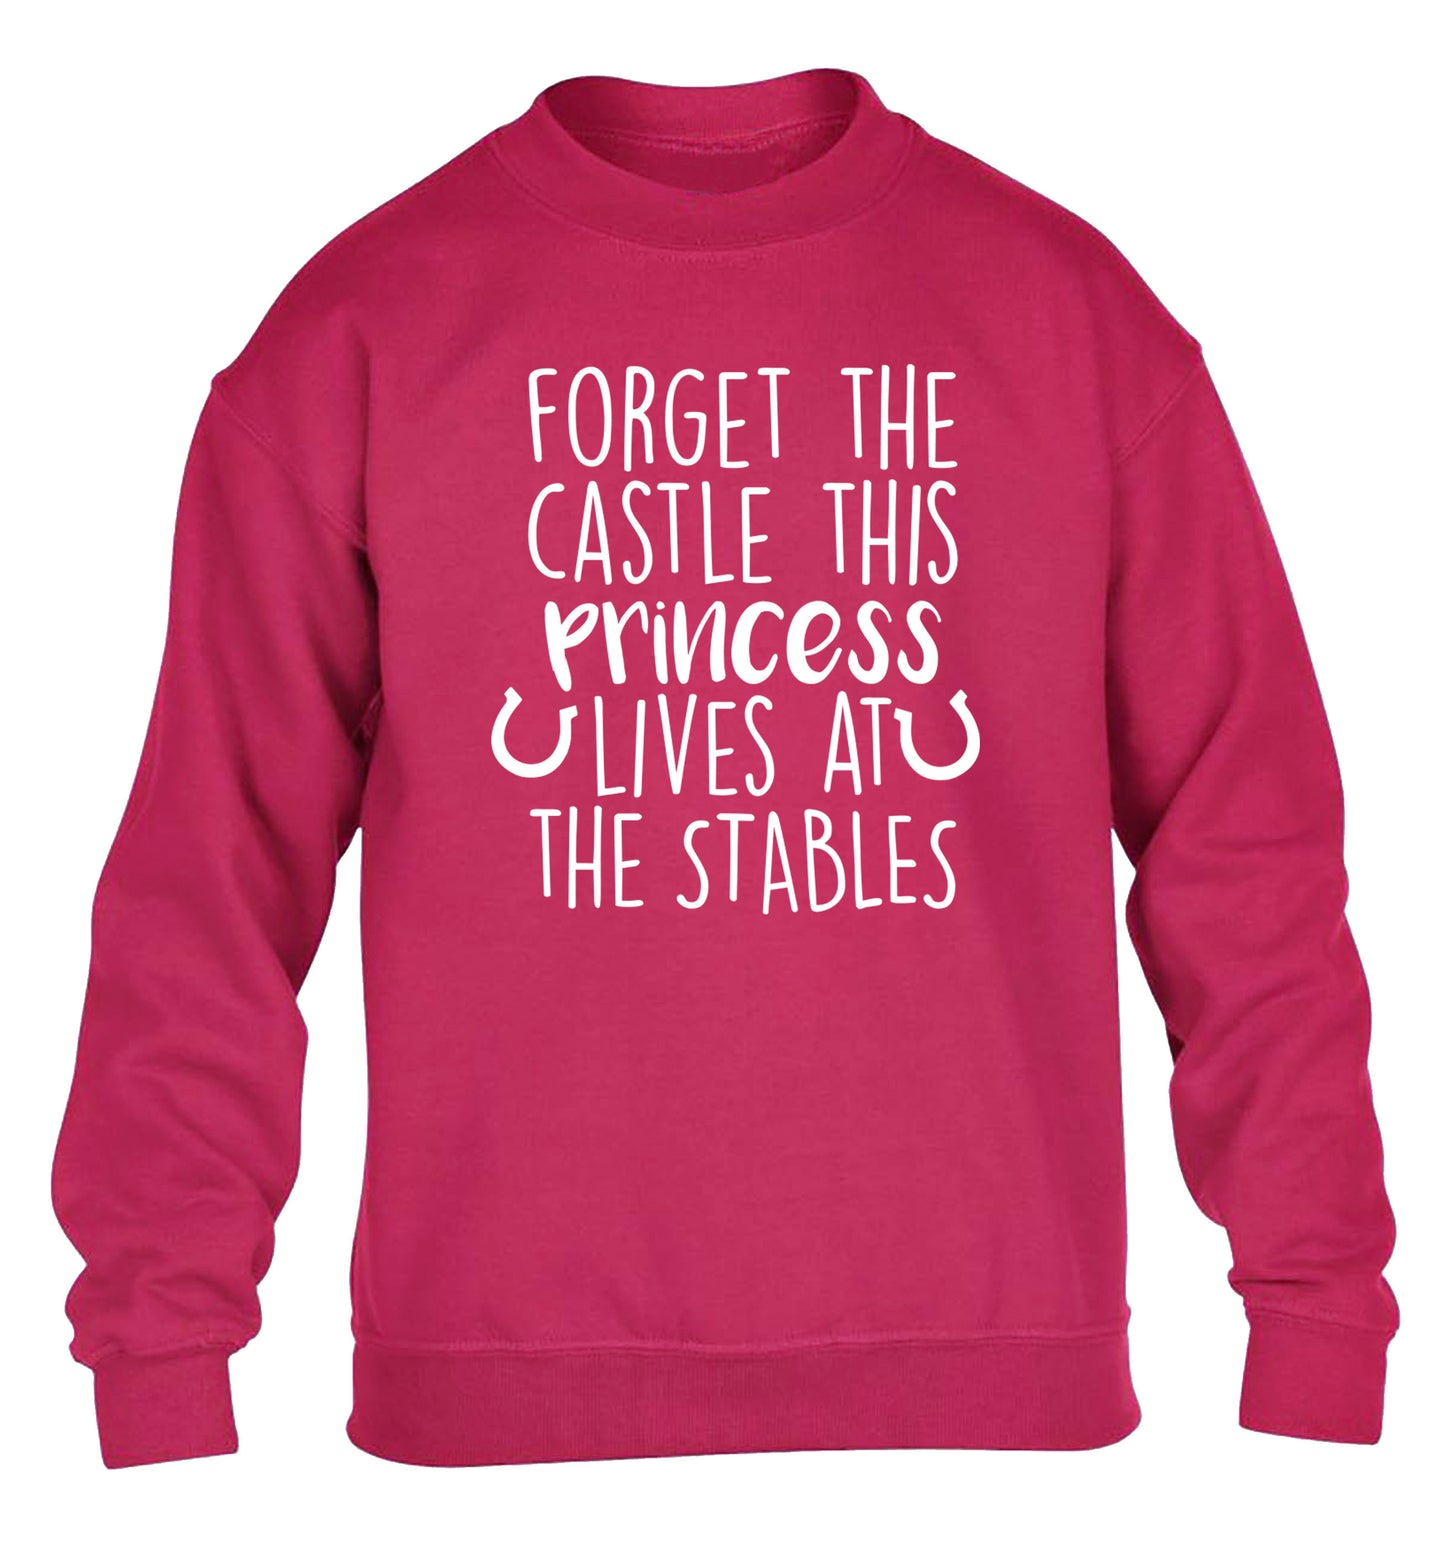 Forget the castle this princess lives at the stables children's pink sweater 12-14 Years